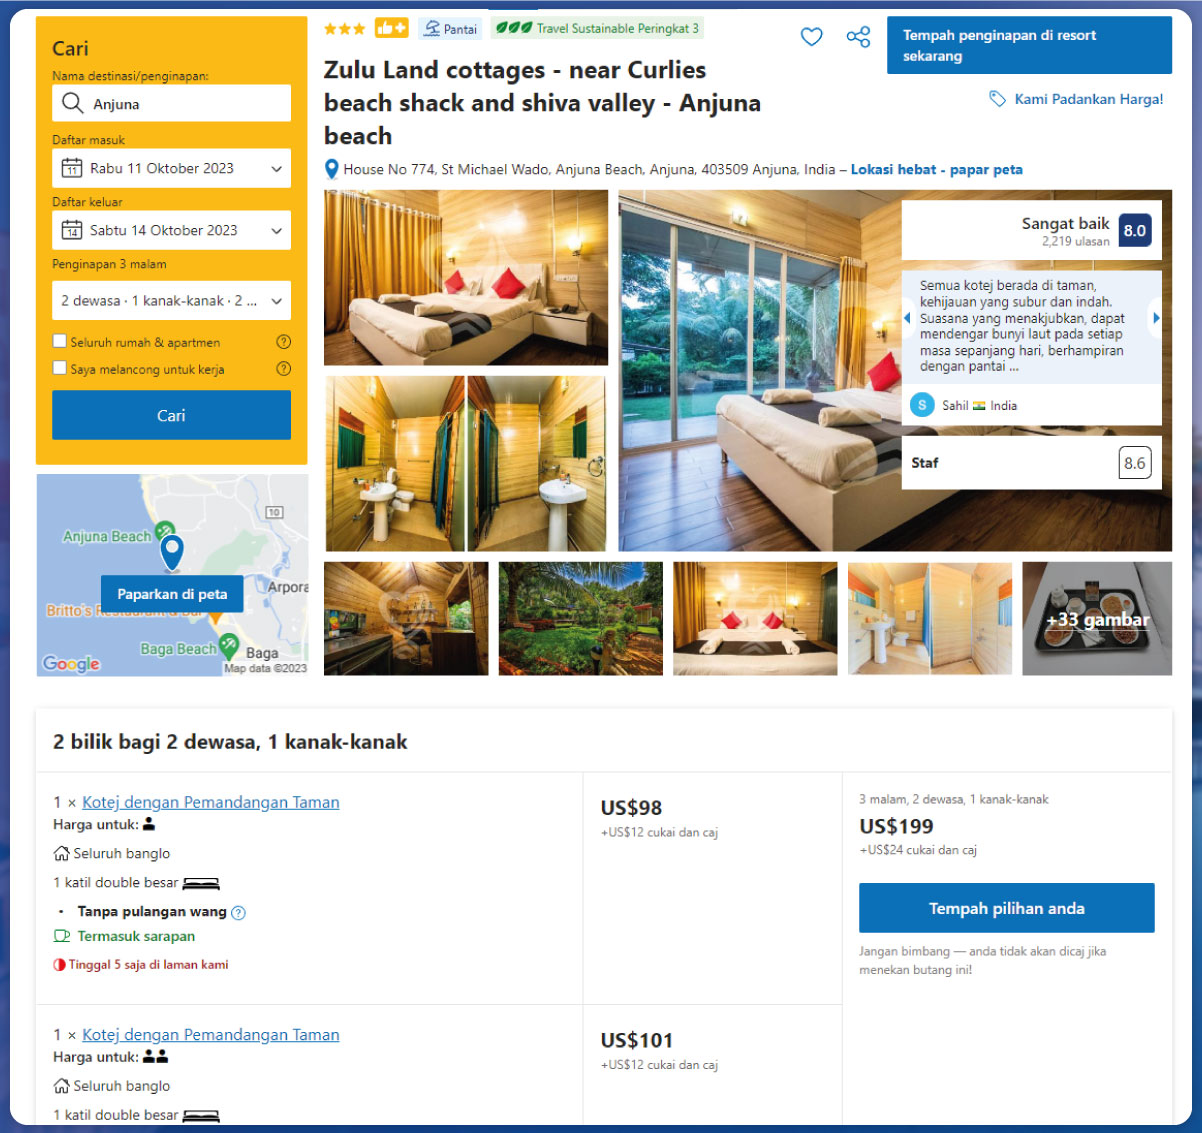 List-of-Data-Fields-You-Should-Consider-to-Scrape-Hotel-Pricing-Data-from-Booking-com